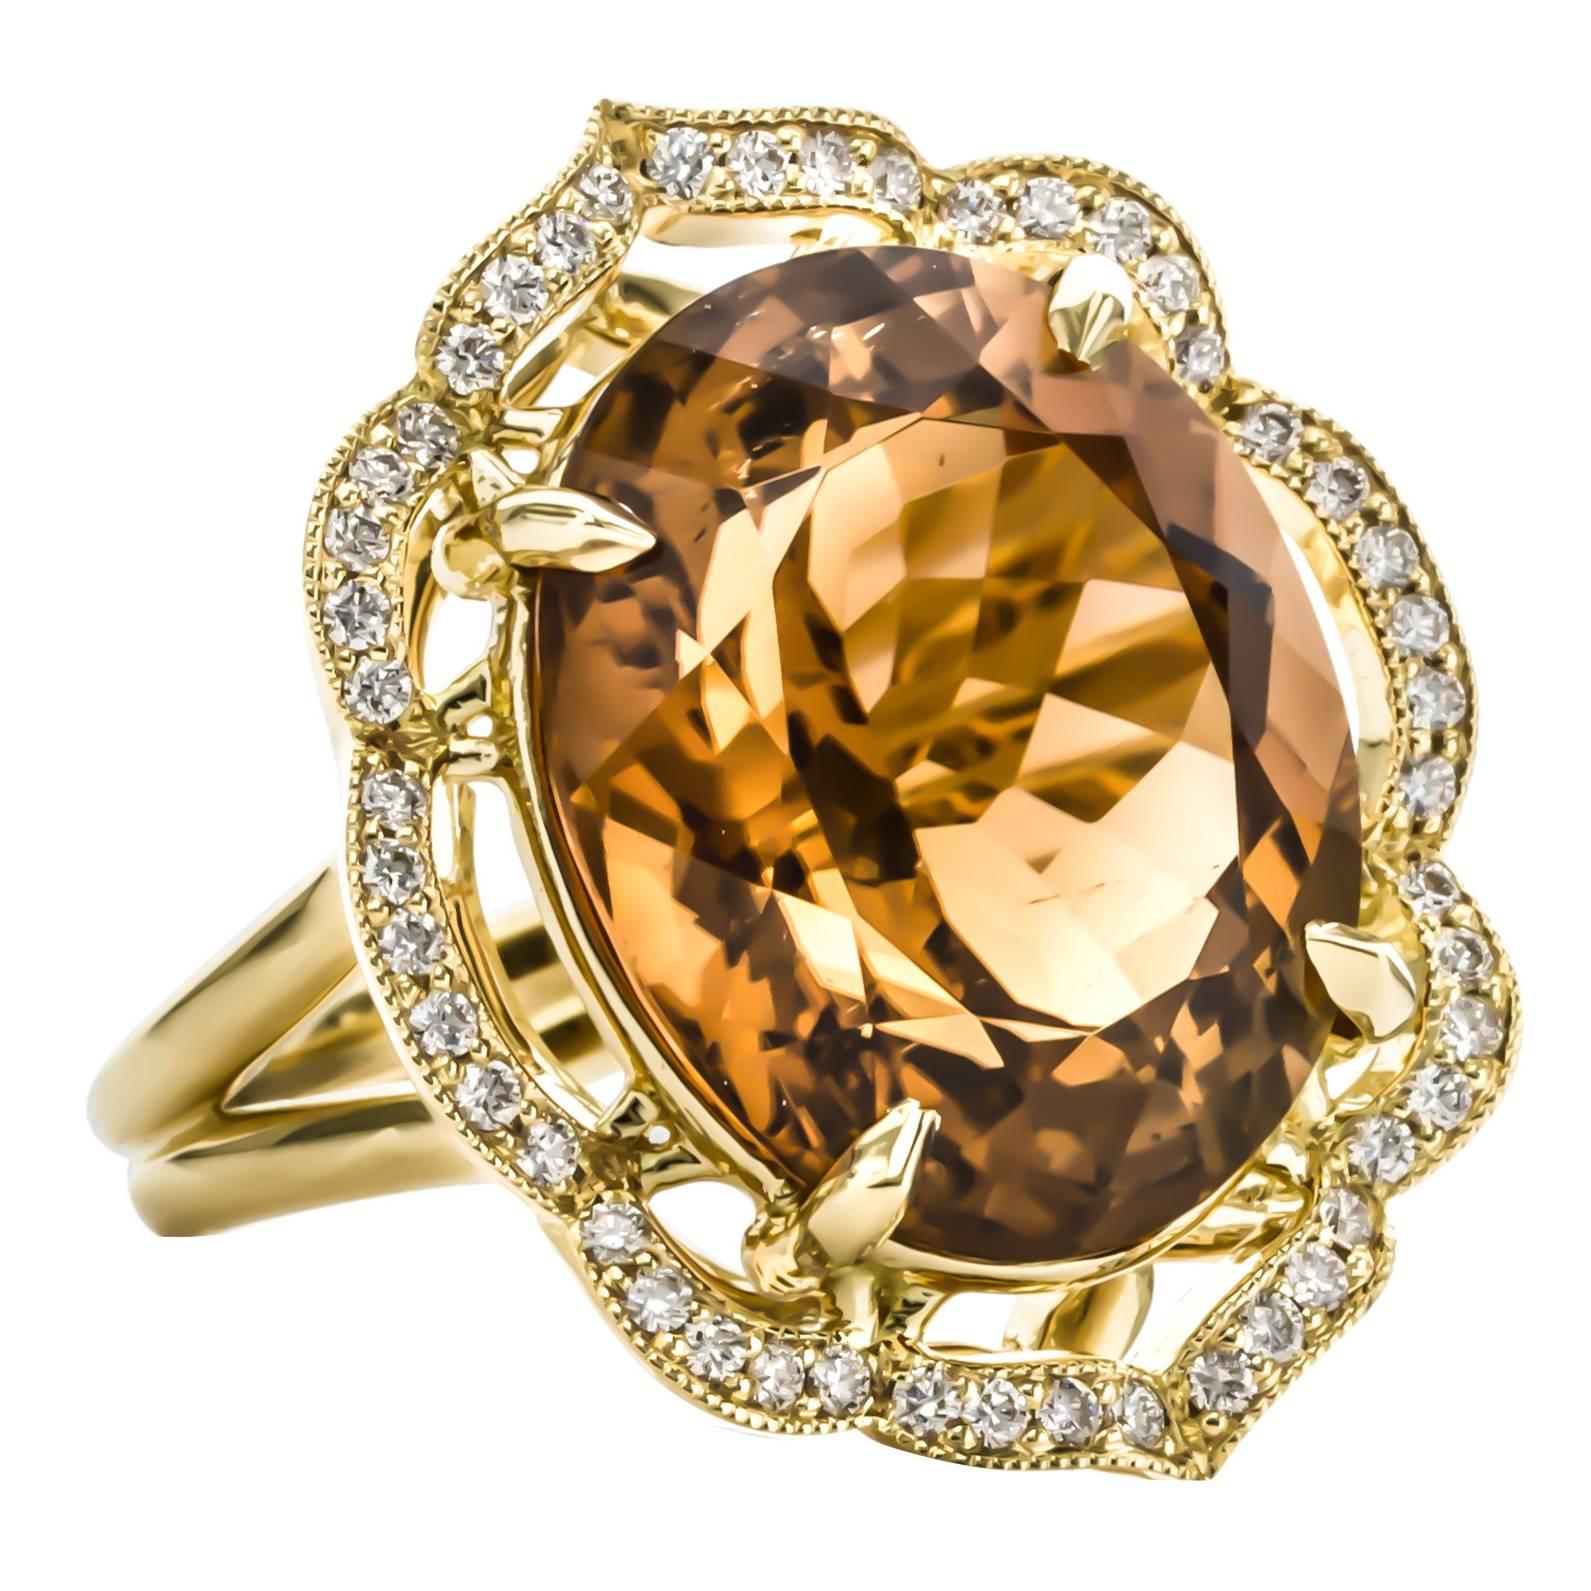 One of a Kind 23.27 Carat Orange Tourmaline Diamond Gold Cocktail Ring For Sale